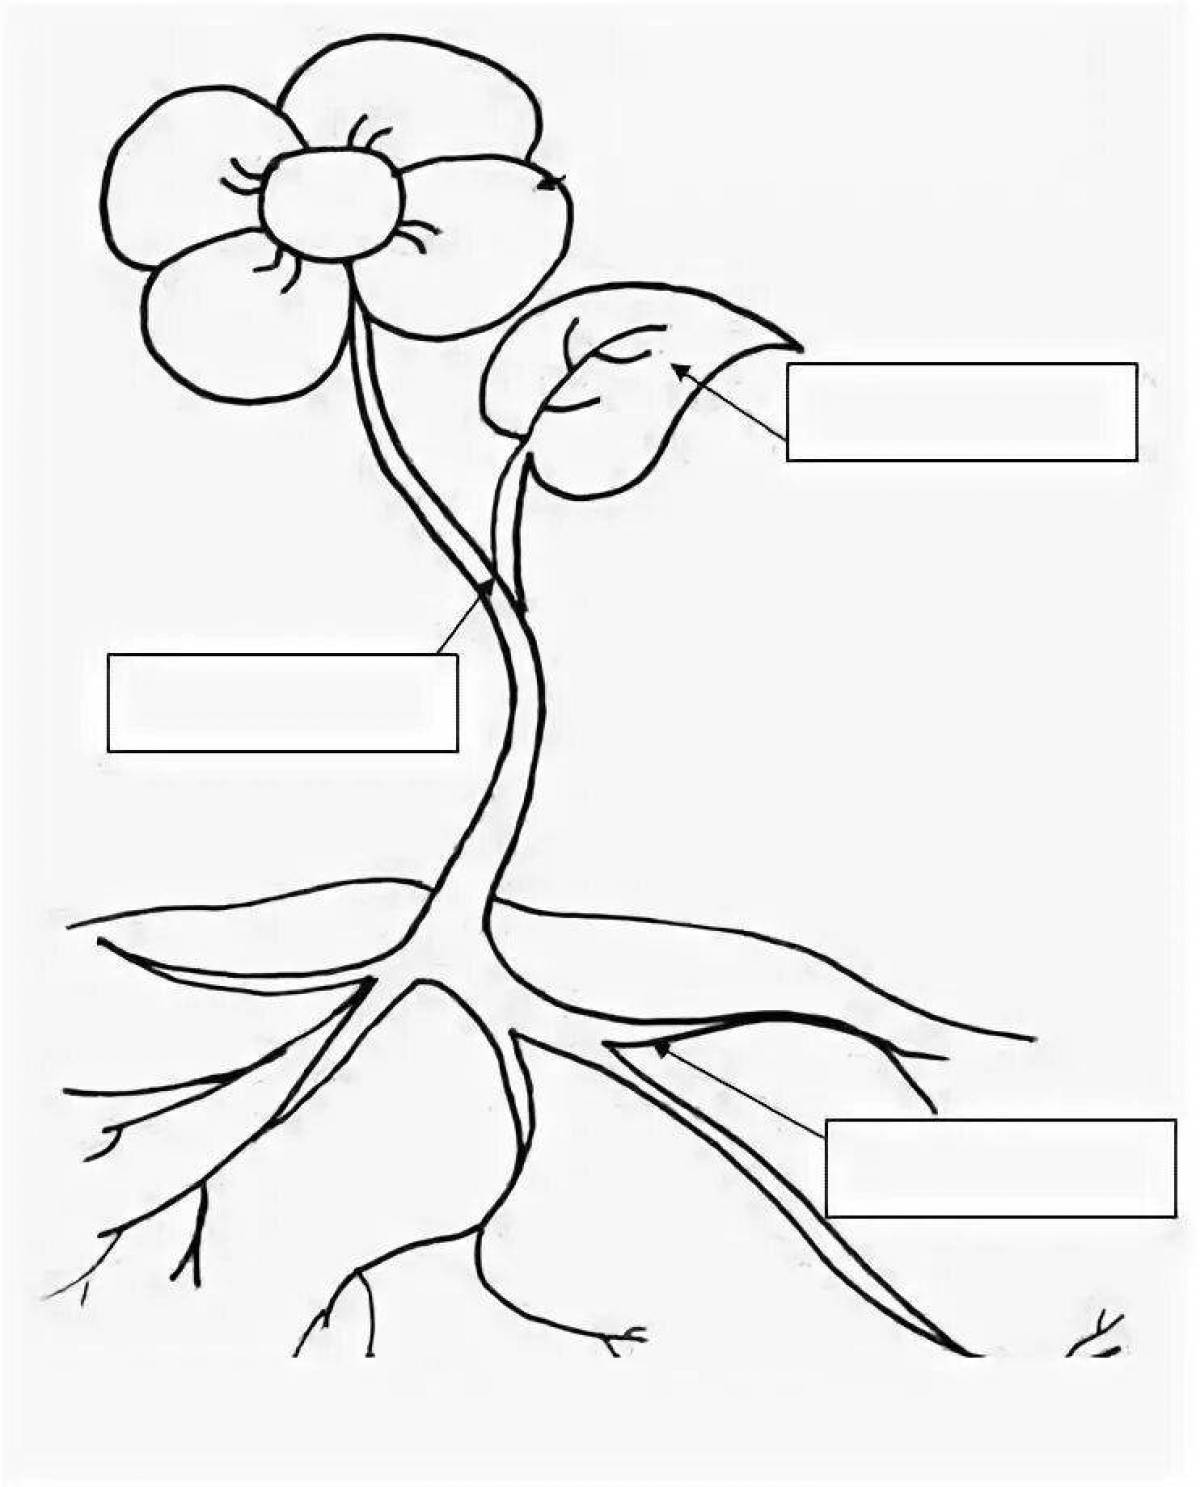 Living coloring page of plant parts